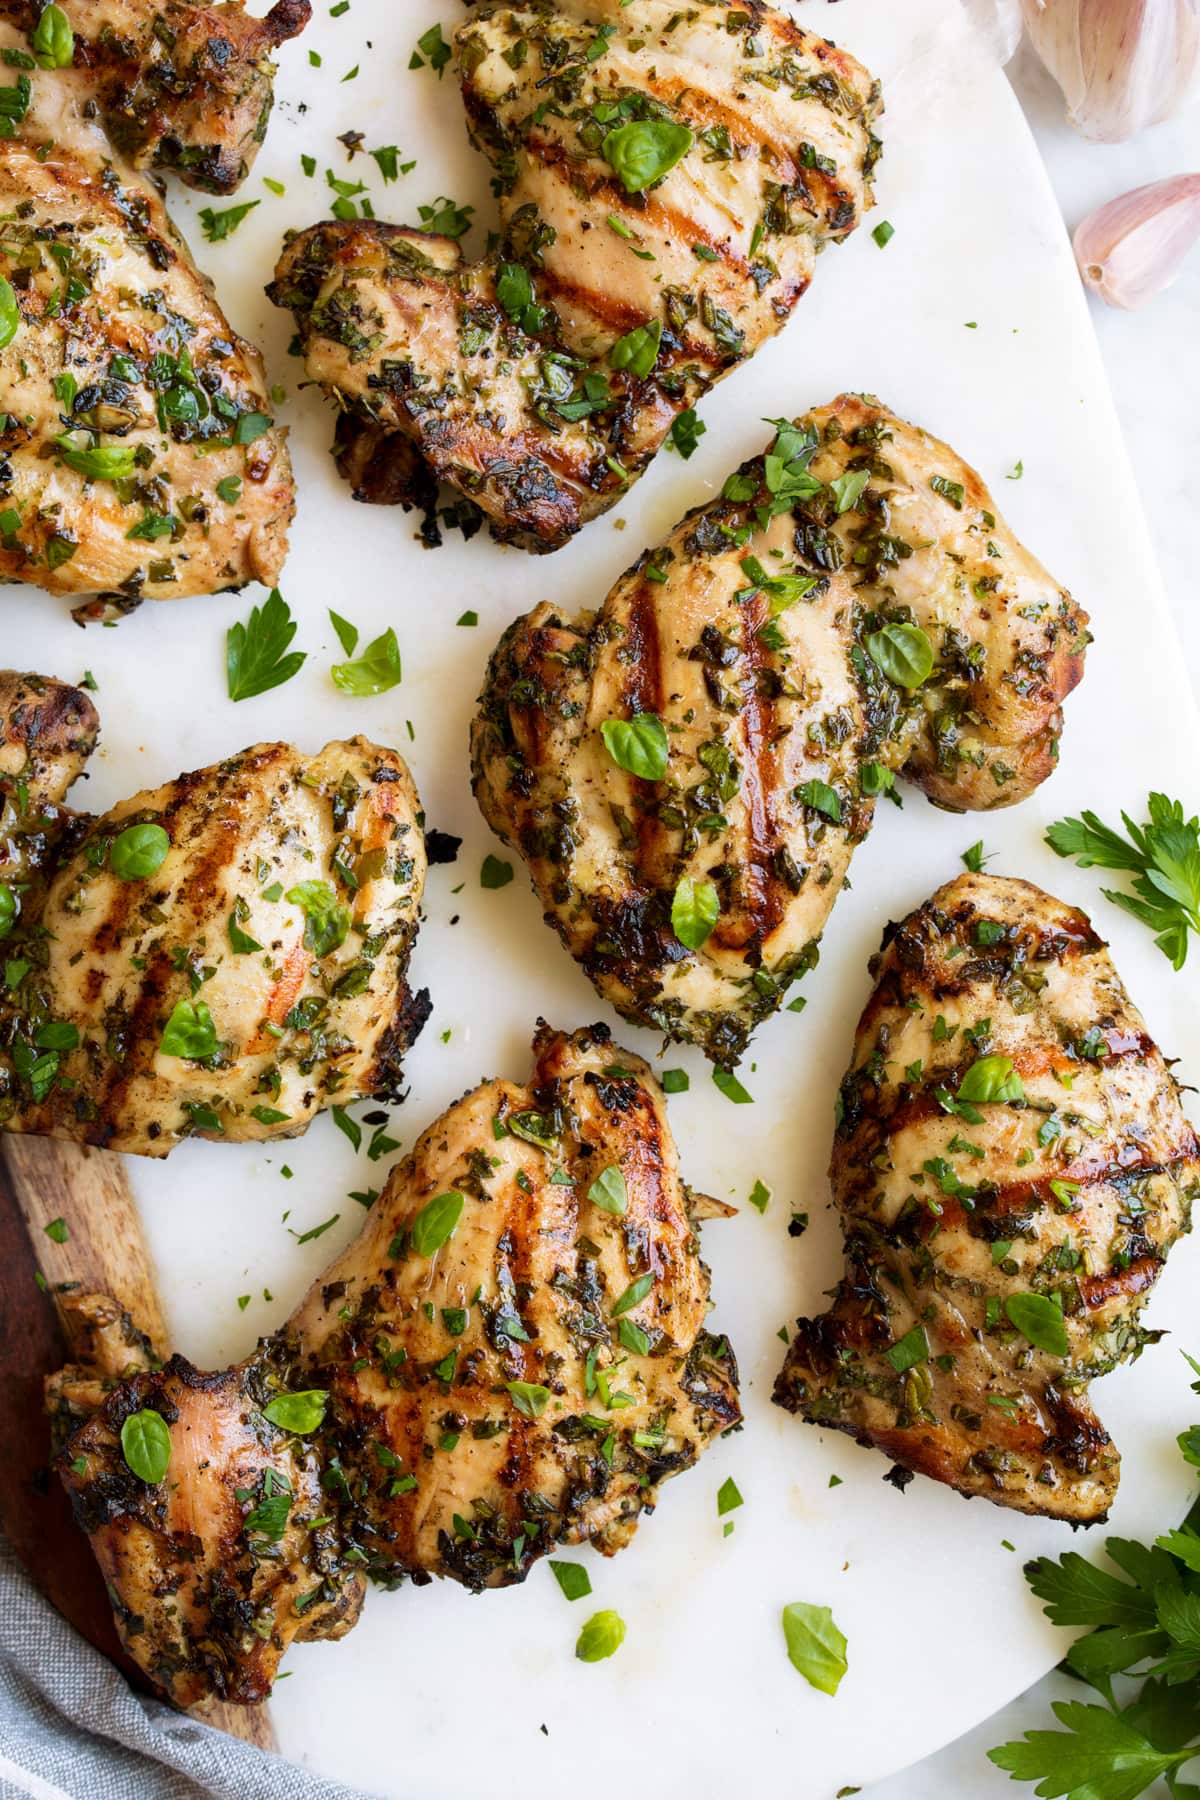 Close up image of grilled chicken with herbs on a white platter.